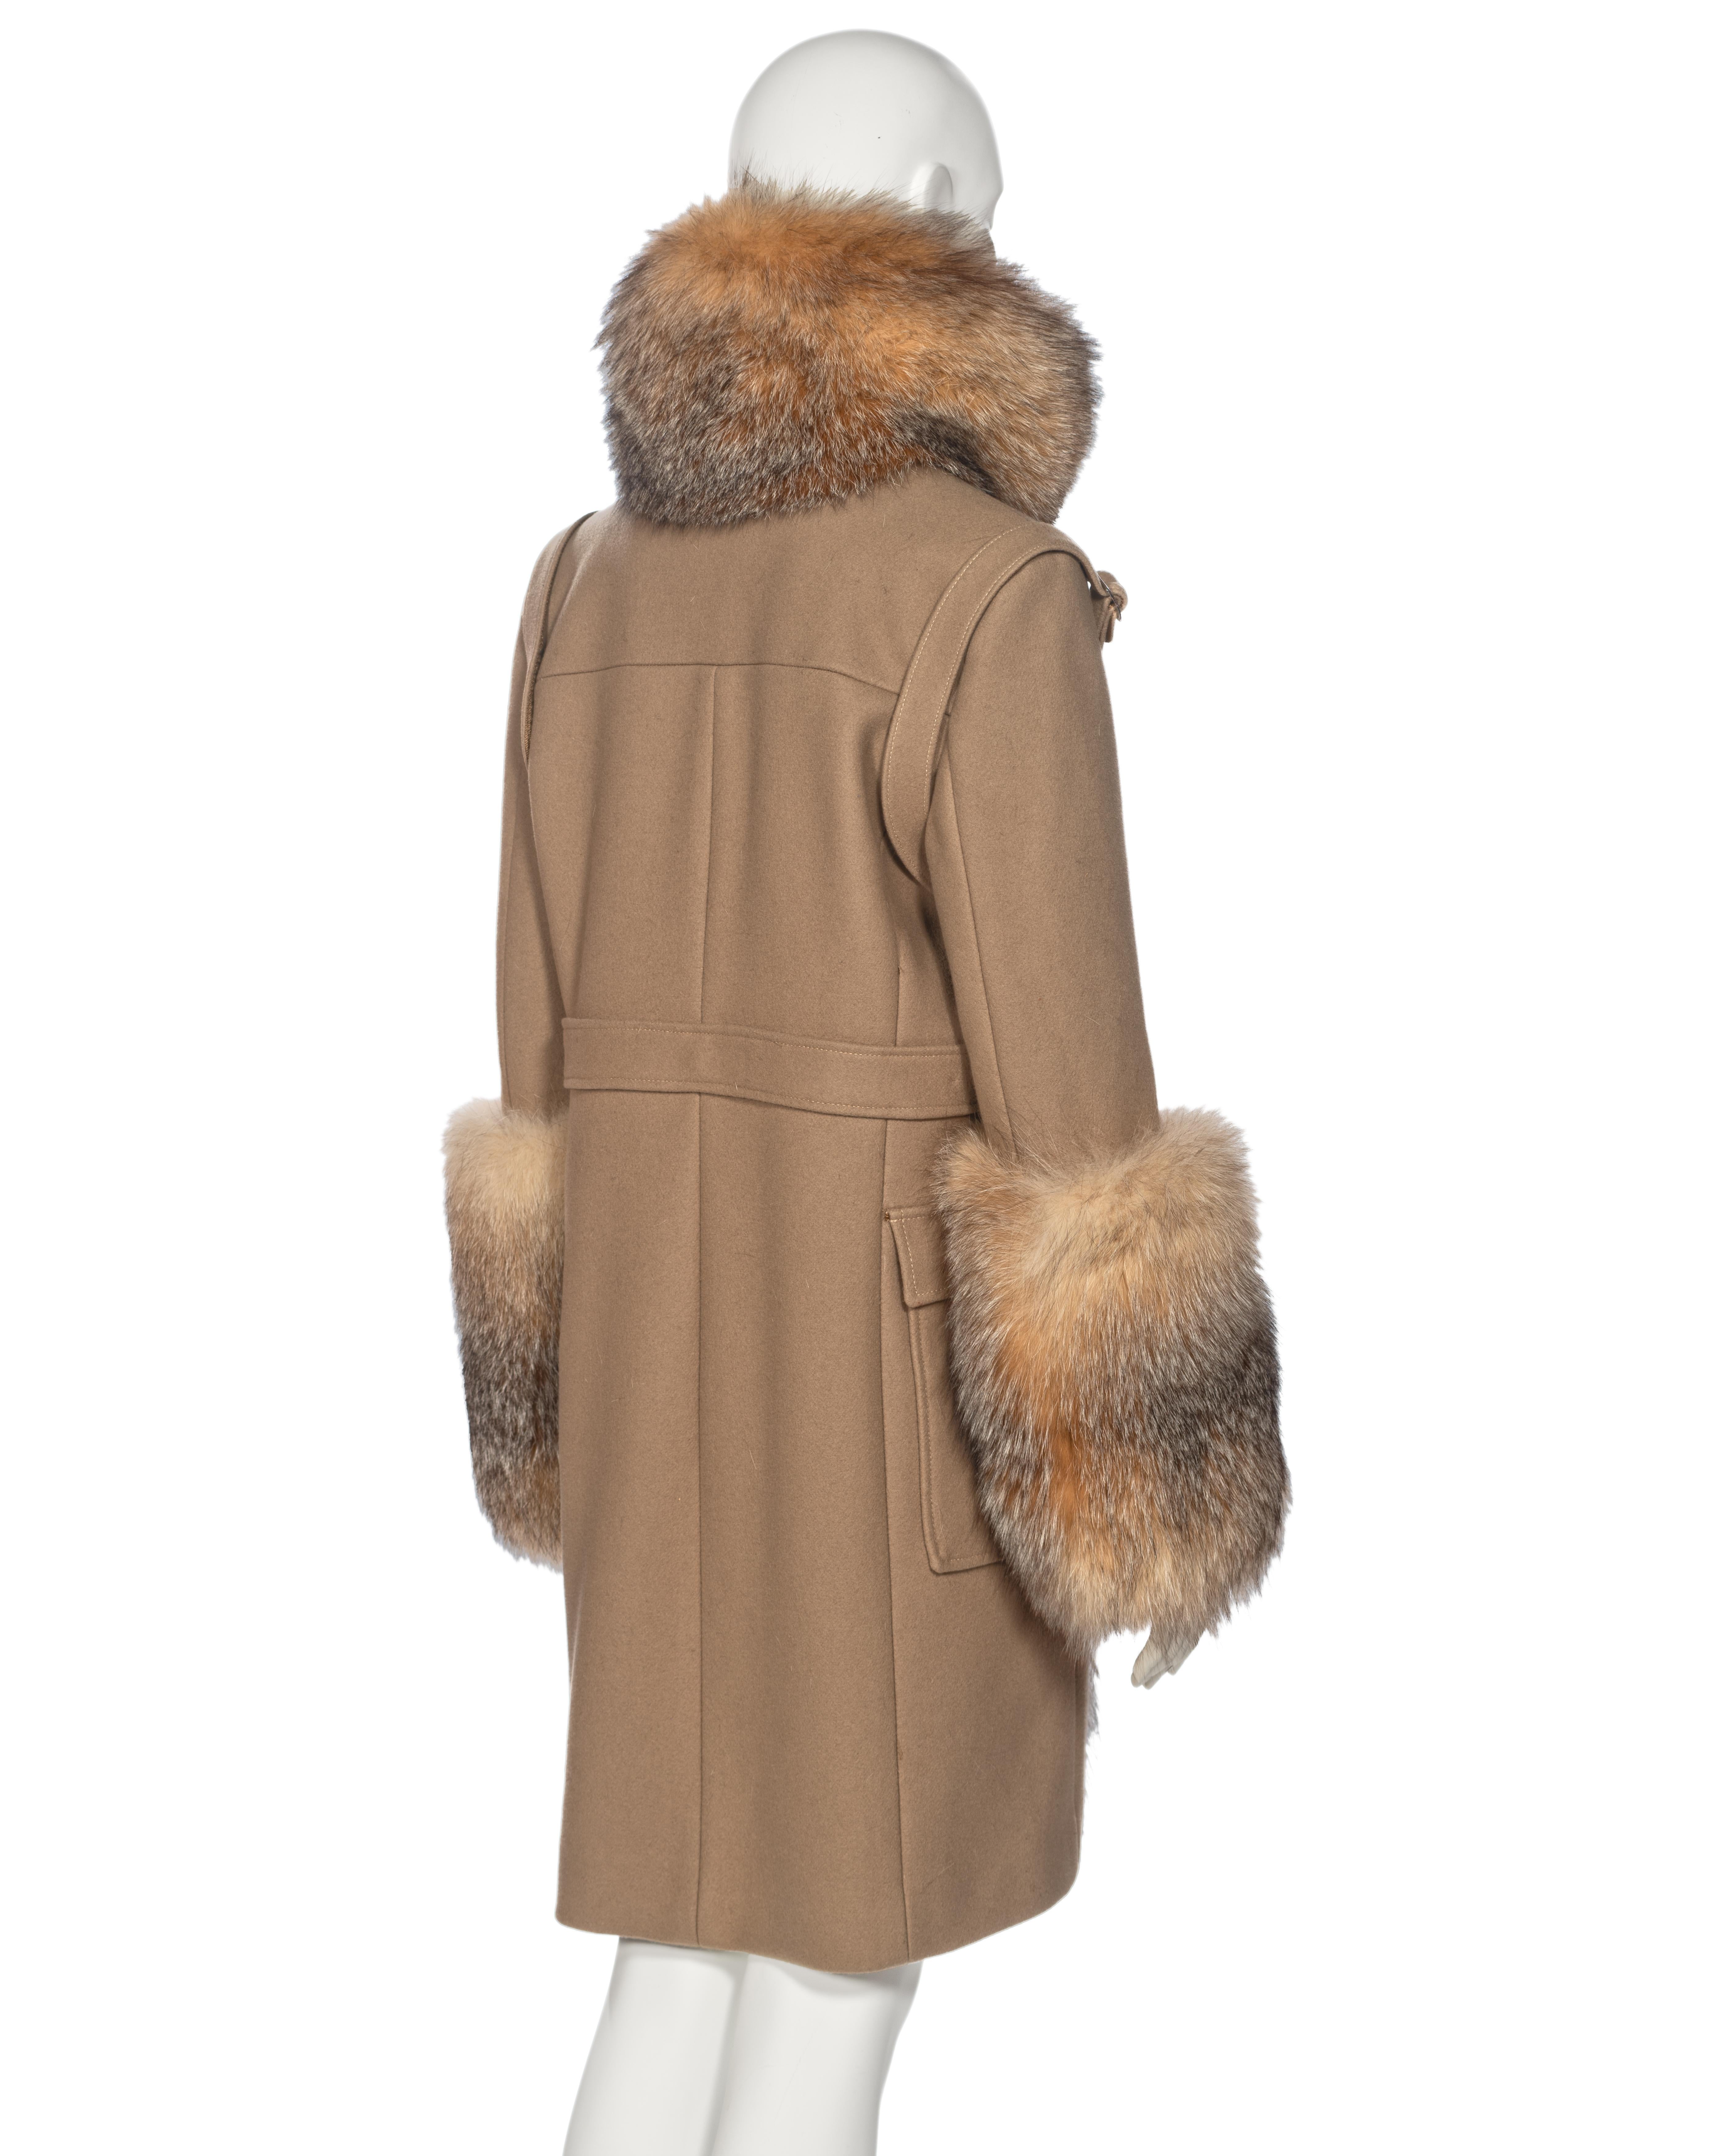 Balenciaga by Nicolas Ghesquière Fur-Trimmed Felted Wool Duffle Coat, fw 2005 For Sale 9